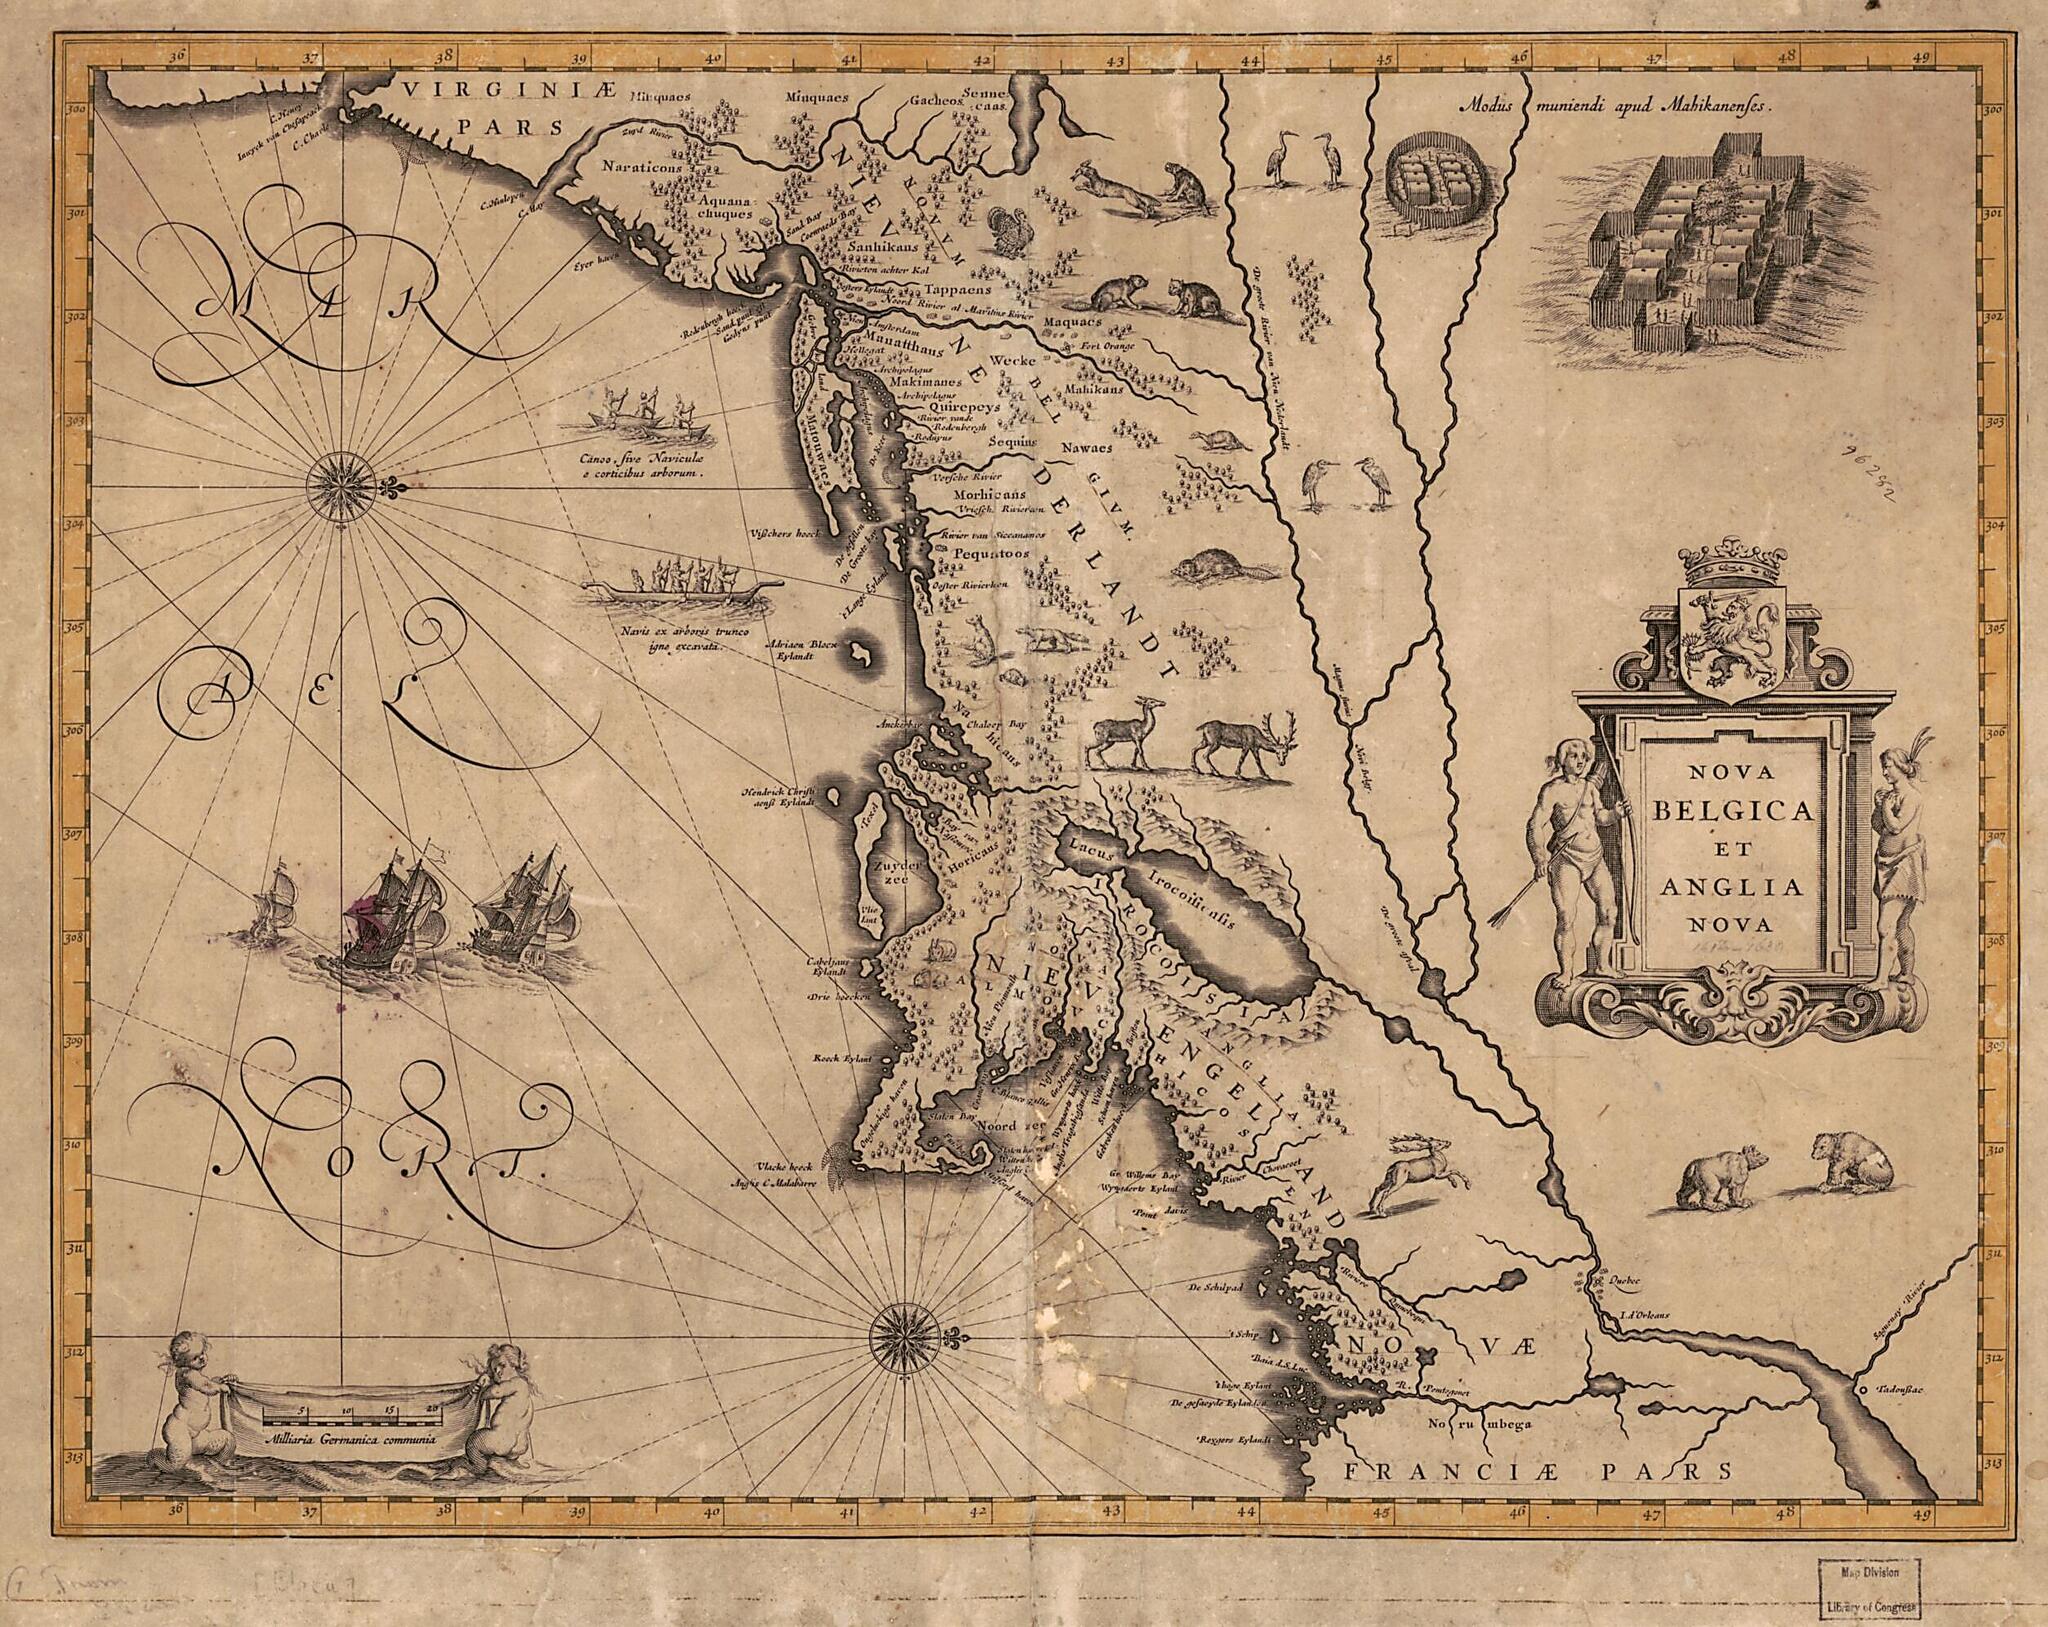 This old map of Nova Belgica Et Anglia Nova from 1630 was created by Willem Janszoon Blaeu in 1630